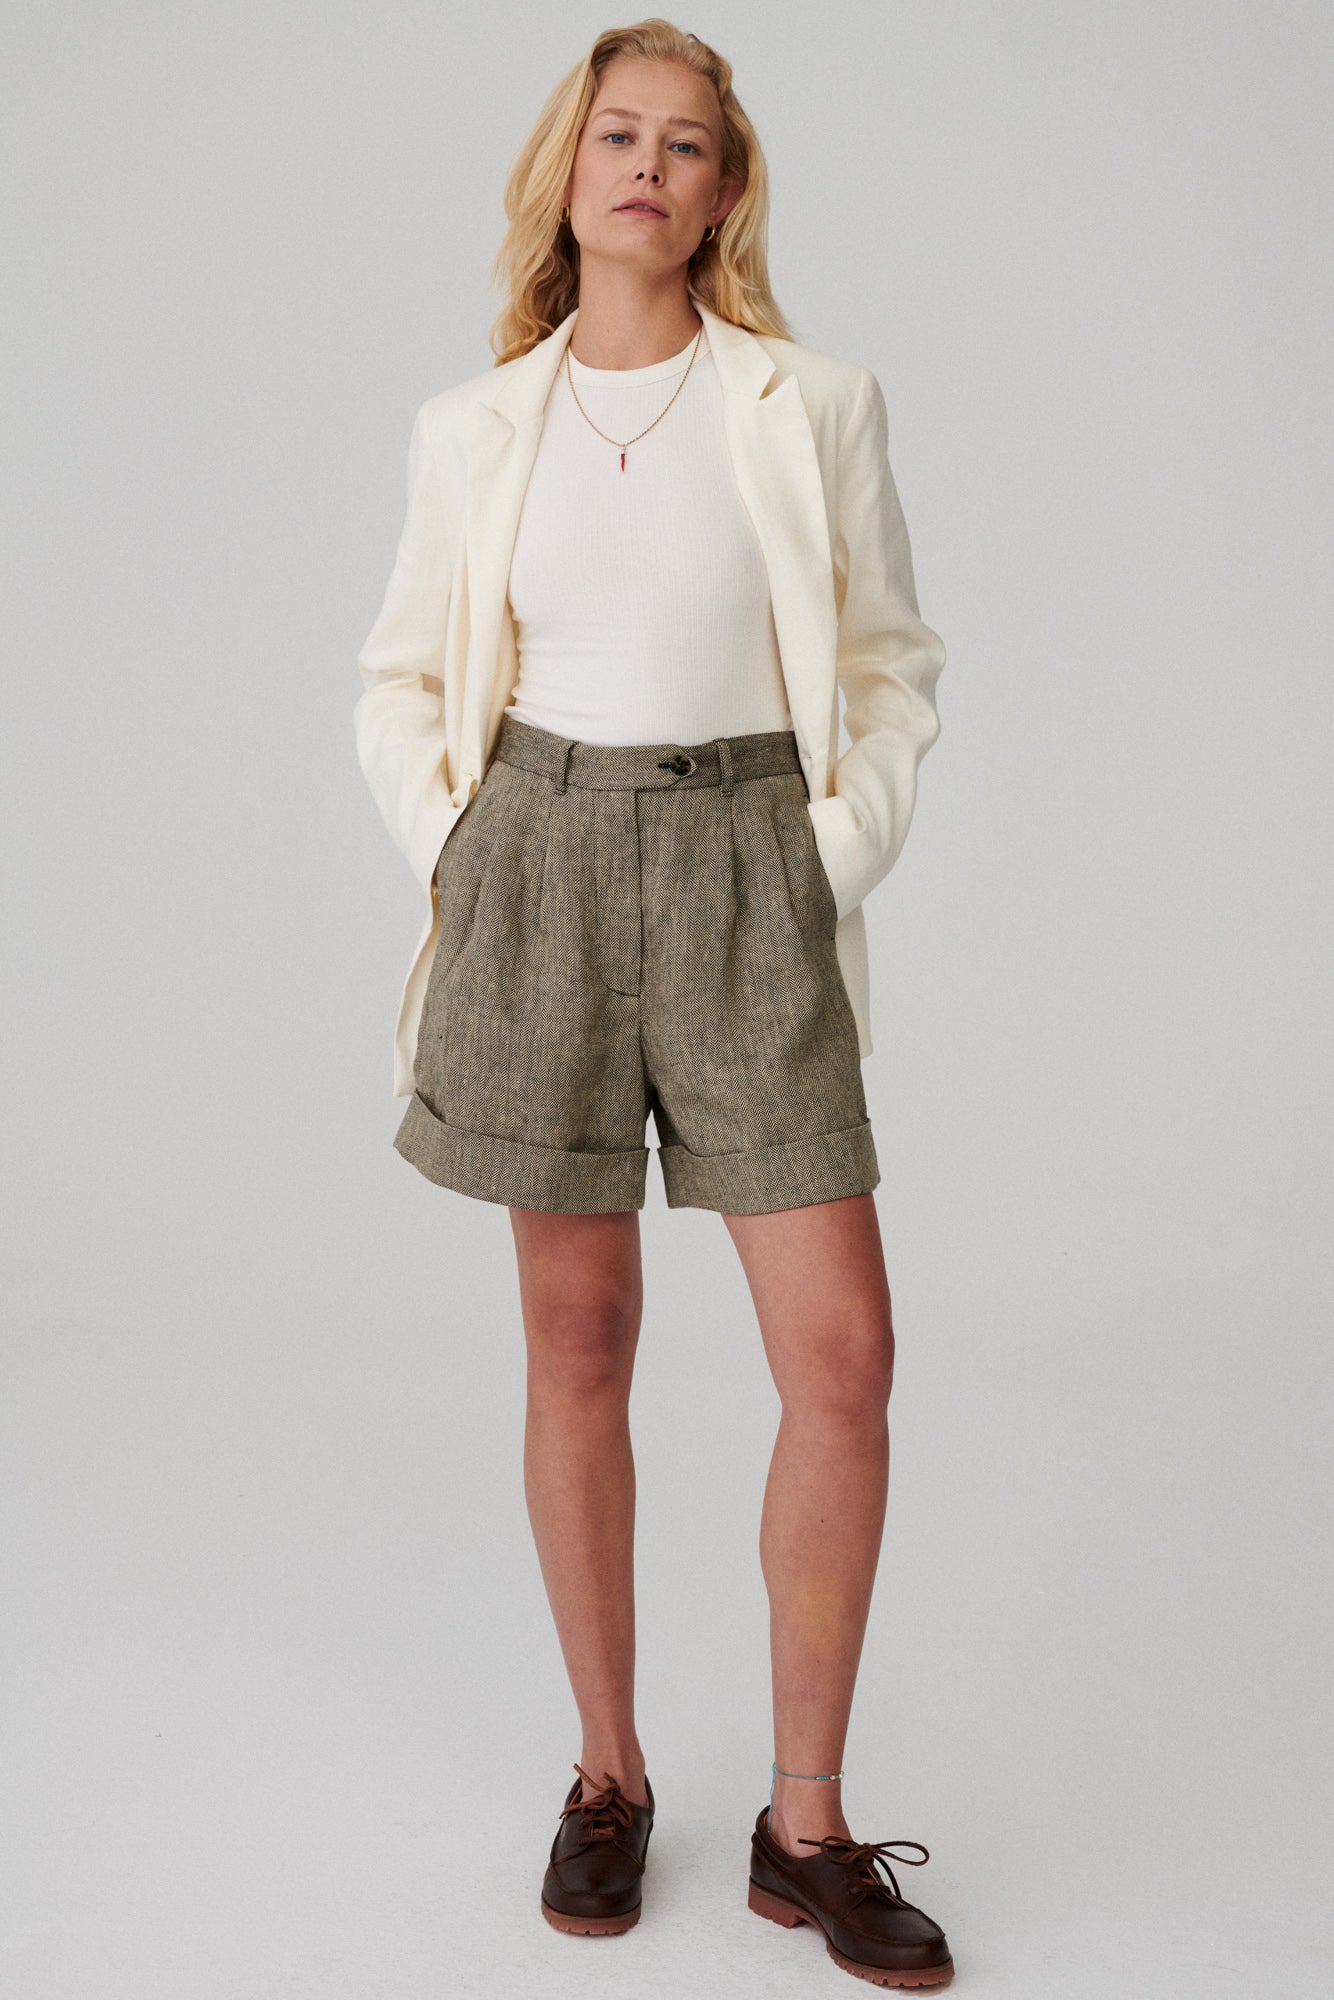 Rib top in organic cotton / 10 / 14 / cream white *blazer-jacket-in-linen-18-07-cream-white,shorts-in-linen-09-07-pine-cone* ?The model is 173 cm high and wears size S?